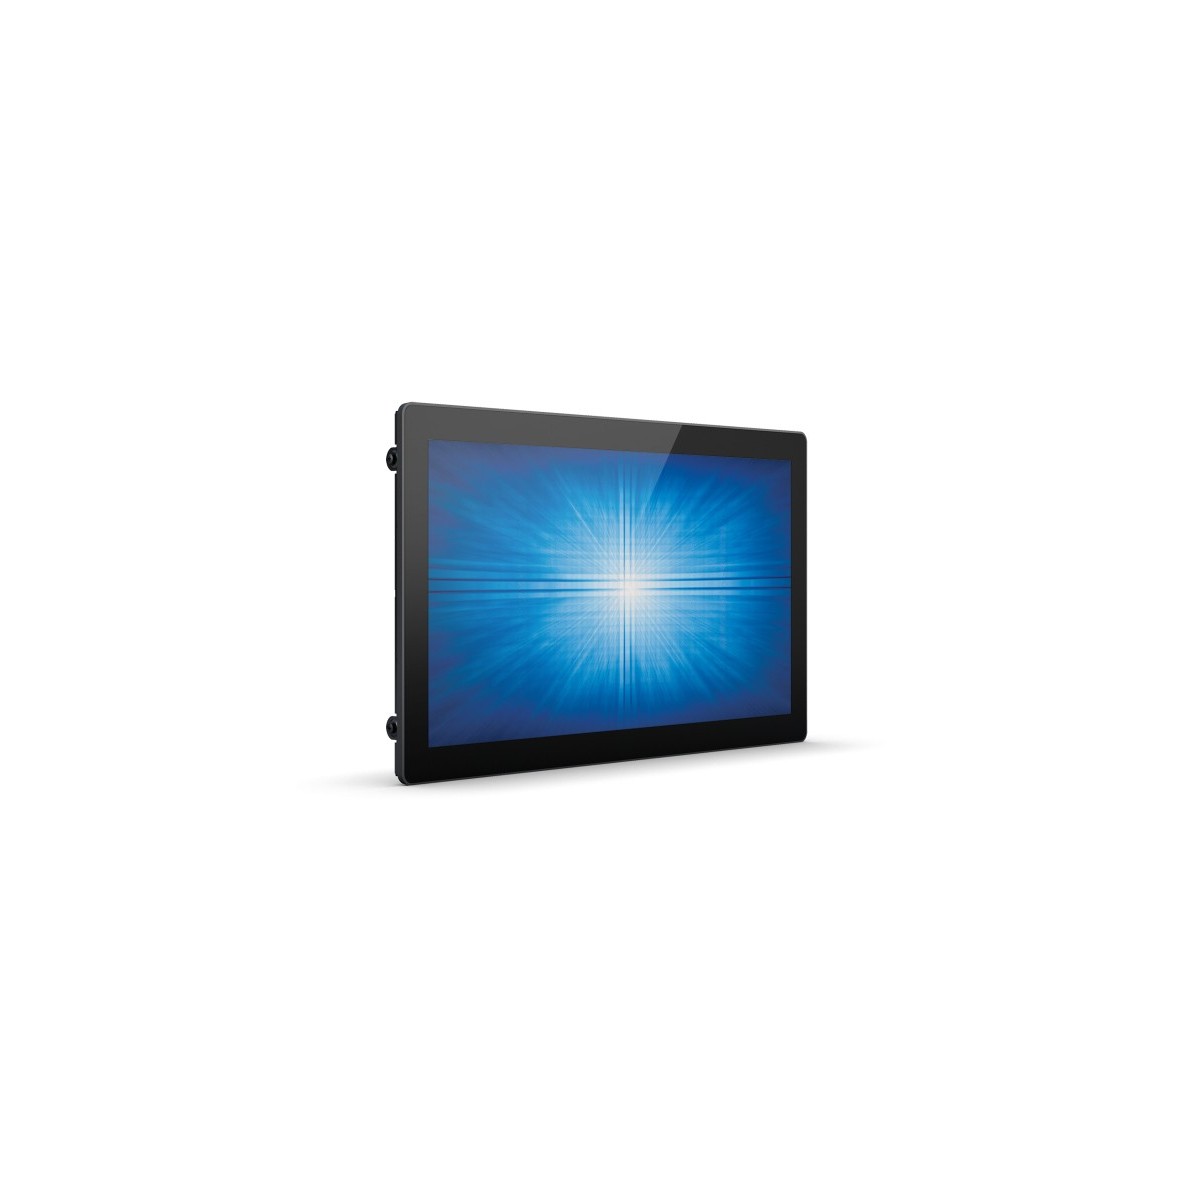 Elo Touch Solutions Elo Touch Solution 2094L - 49.5 cm (19.5) - 225 cd/m² - LCD/TFT - 20 ms - 3000:1 - 1920 x 1080 pixels